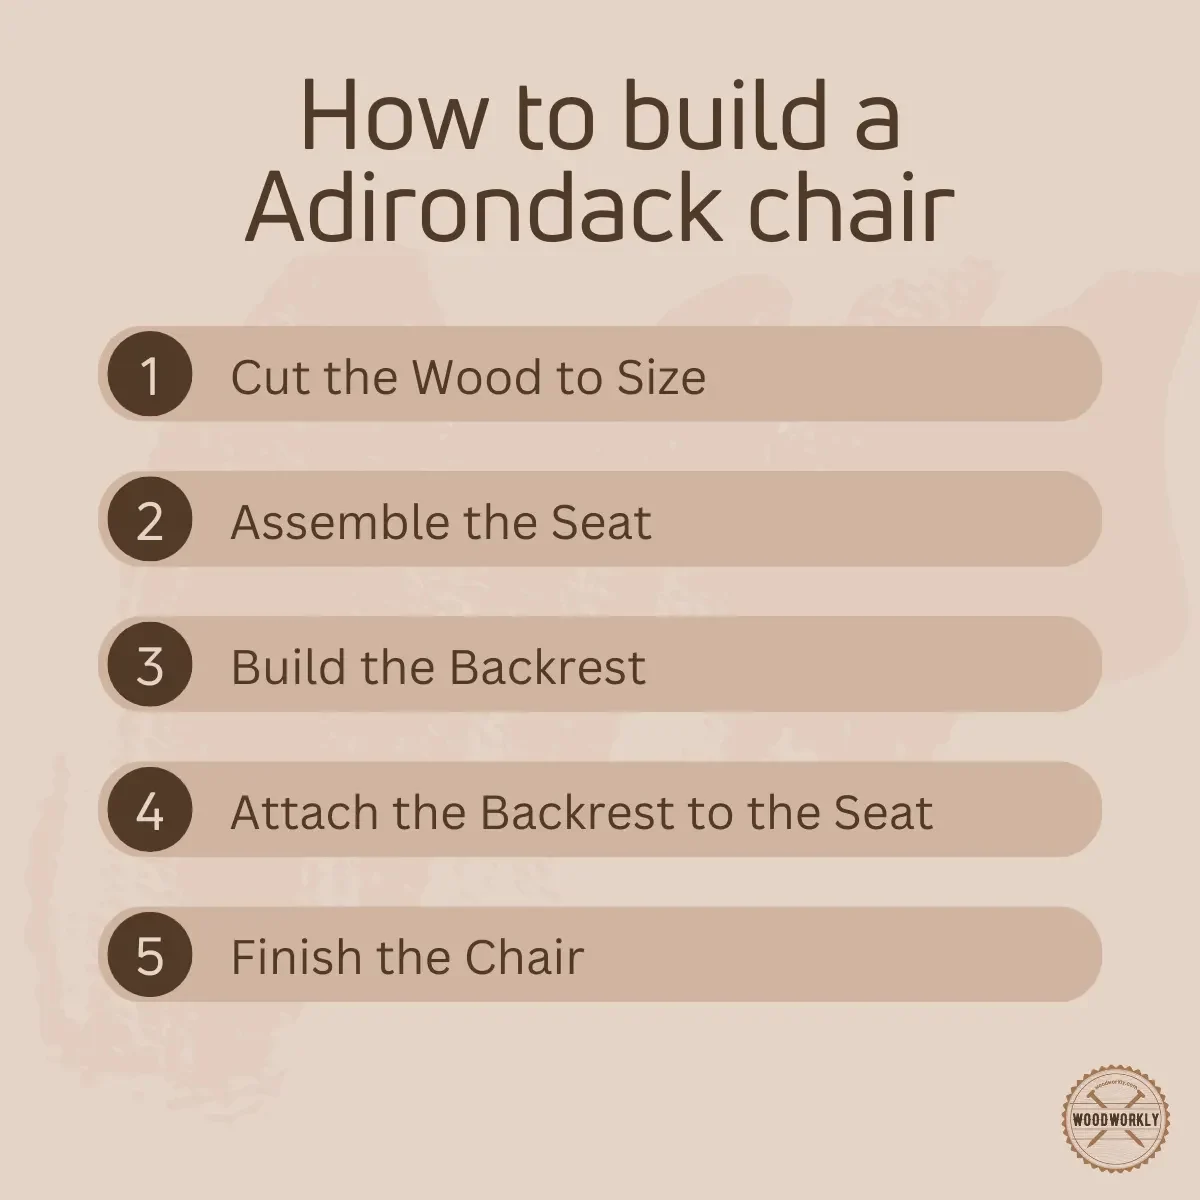 How to build a Adirondack chair